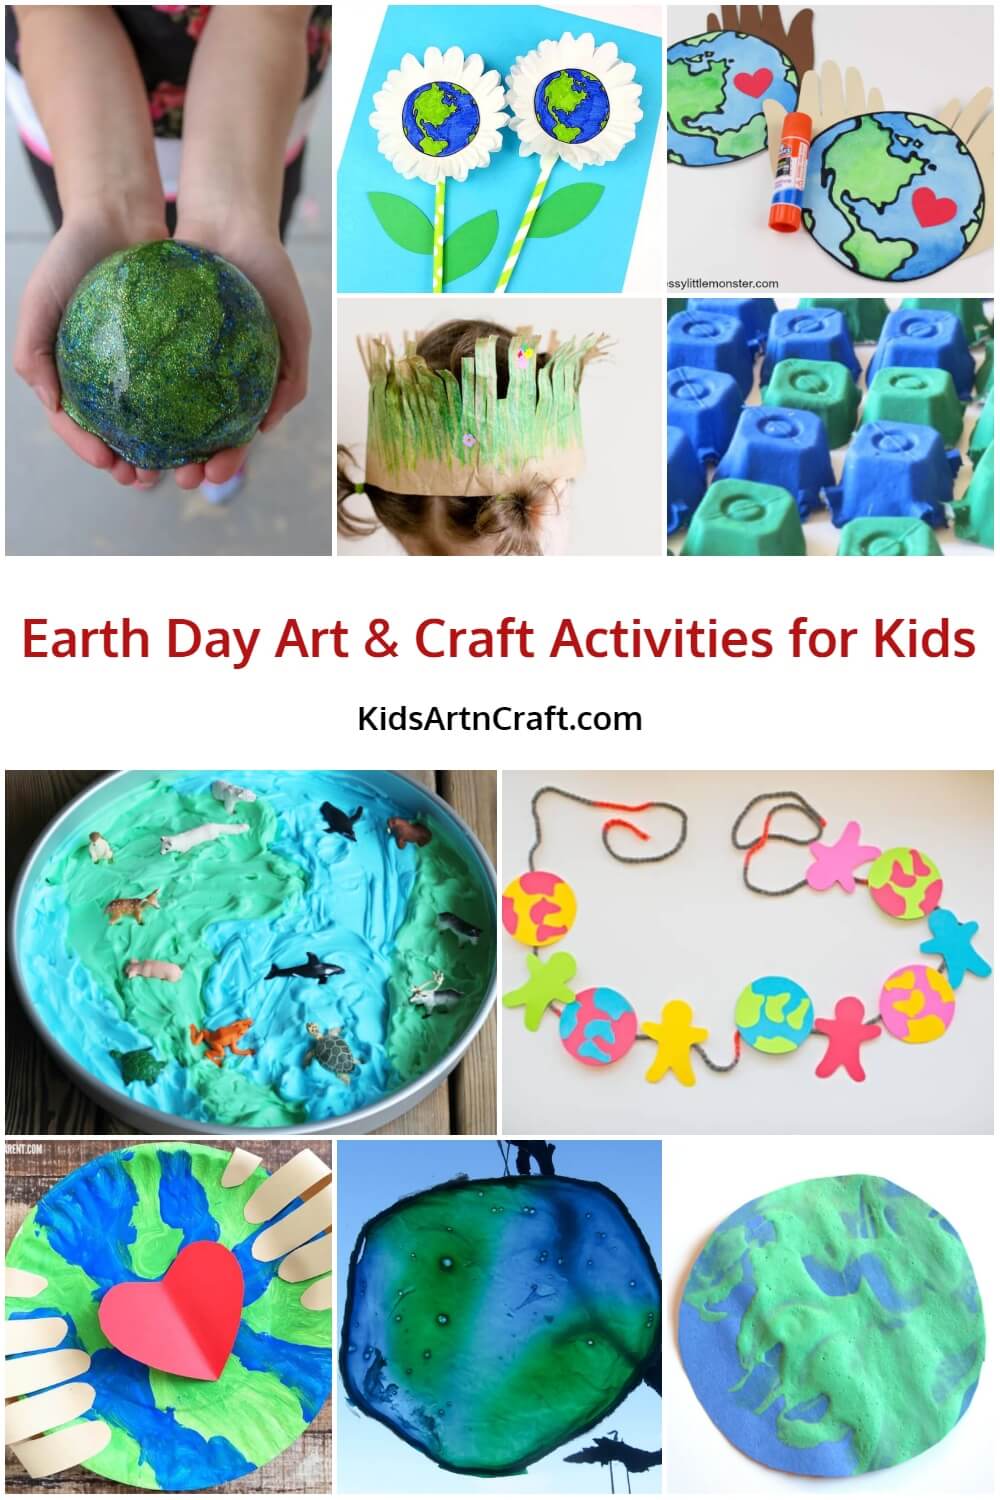 Earth Day Art & Craft Activities for Kids